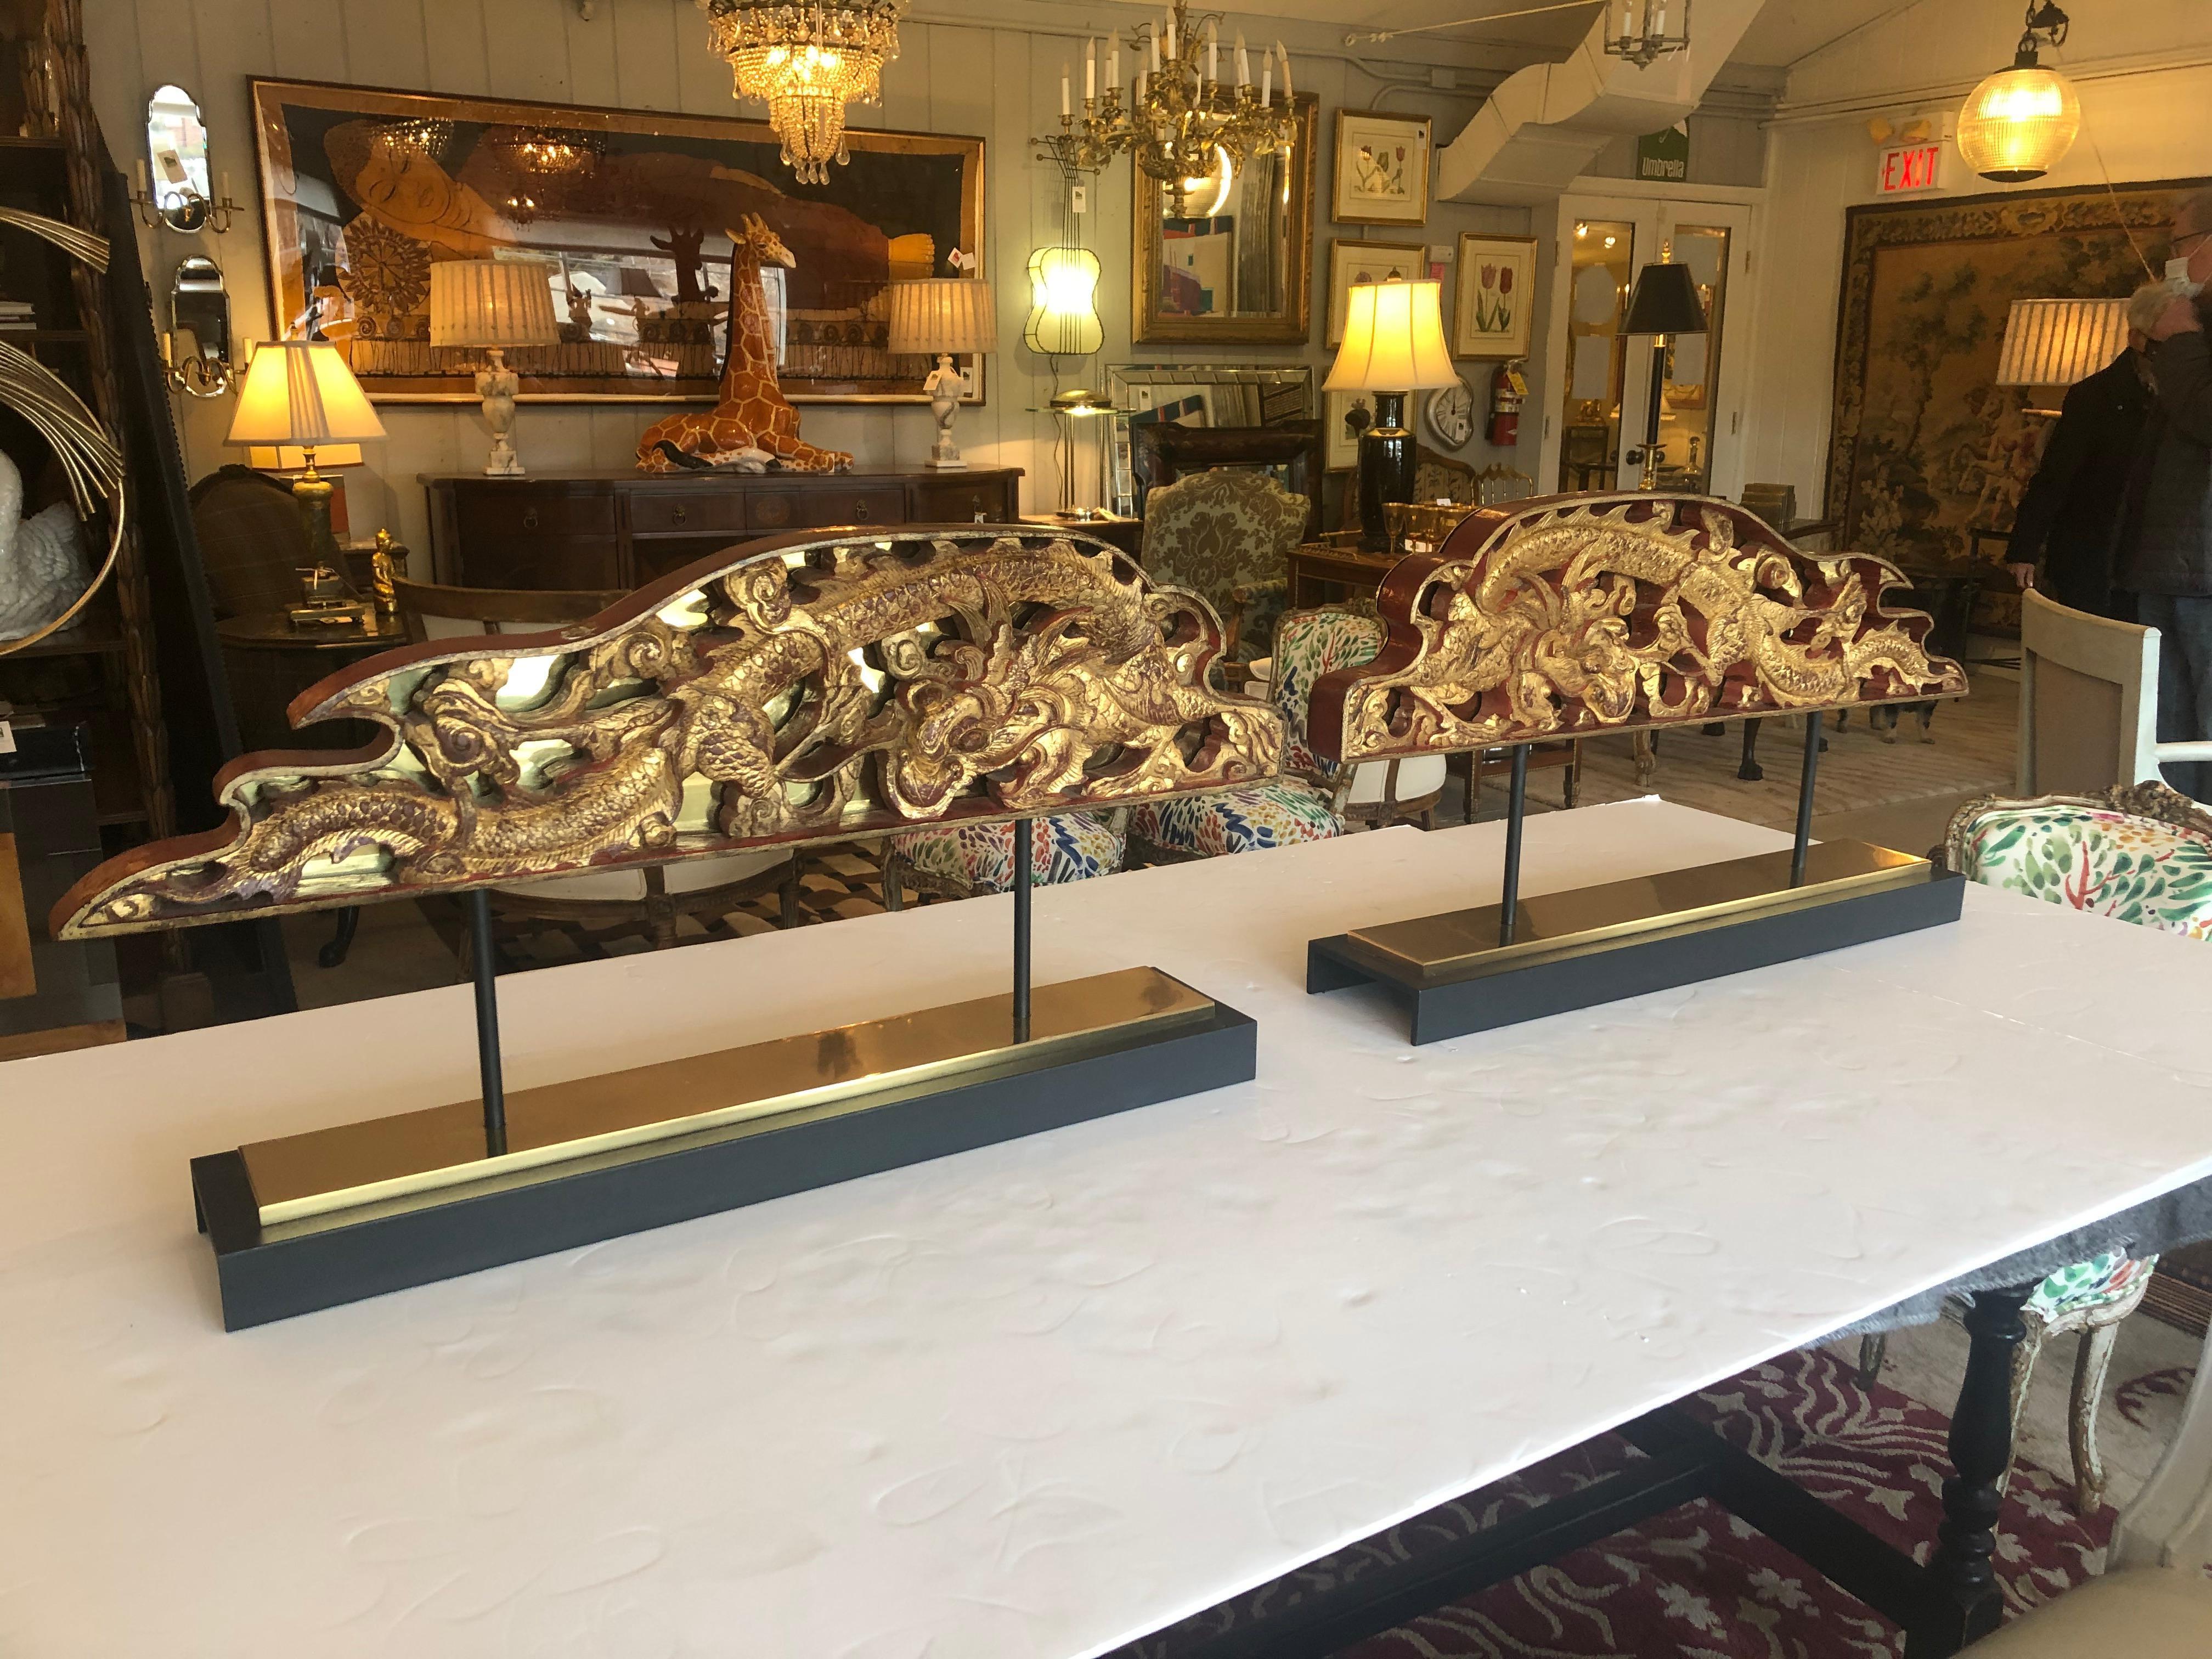 A sensational dramatic pair of tabletop sculptures made from carved laquered and gilded Chinese architectural fragments having dragons and ornate decoration, each backed in brass and mounted on custom iron and brass stands. Original wax seals on